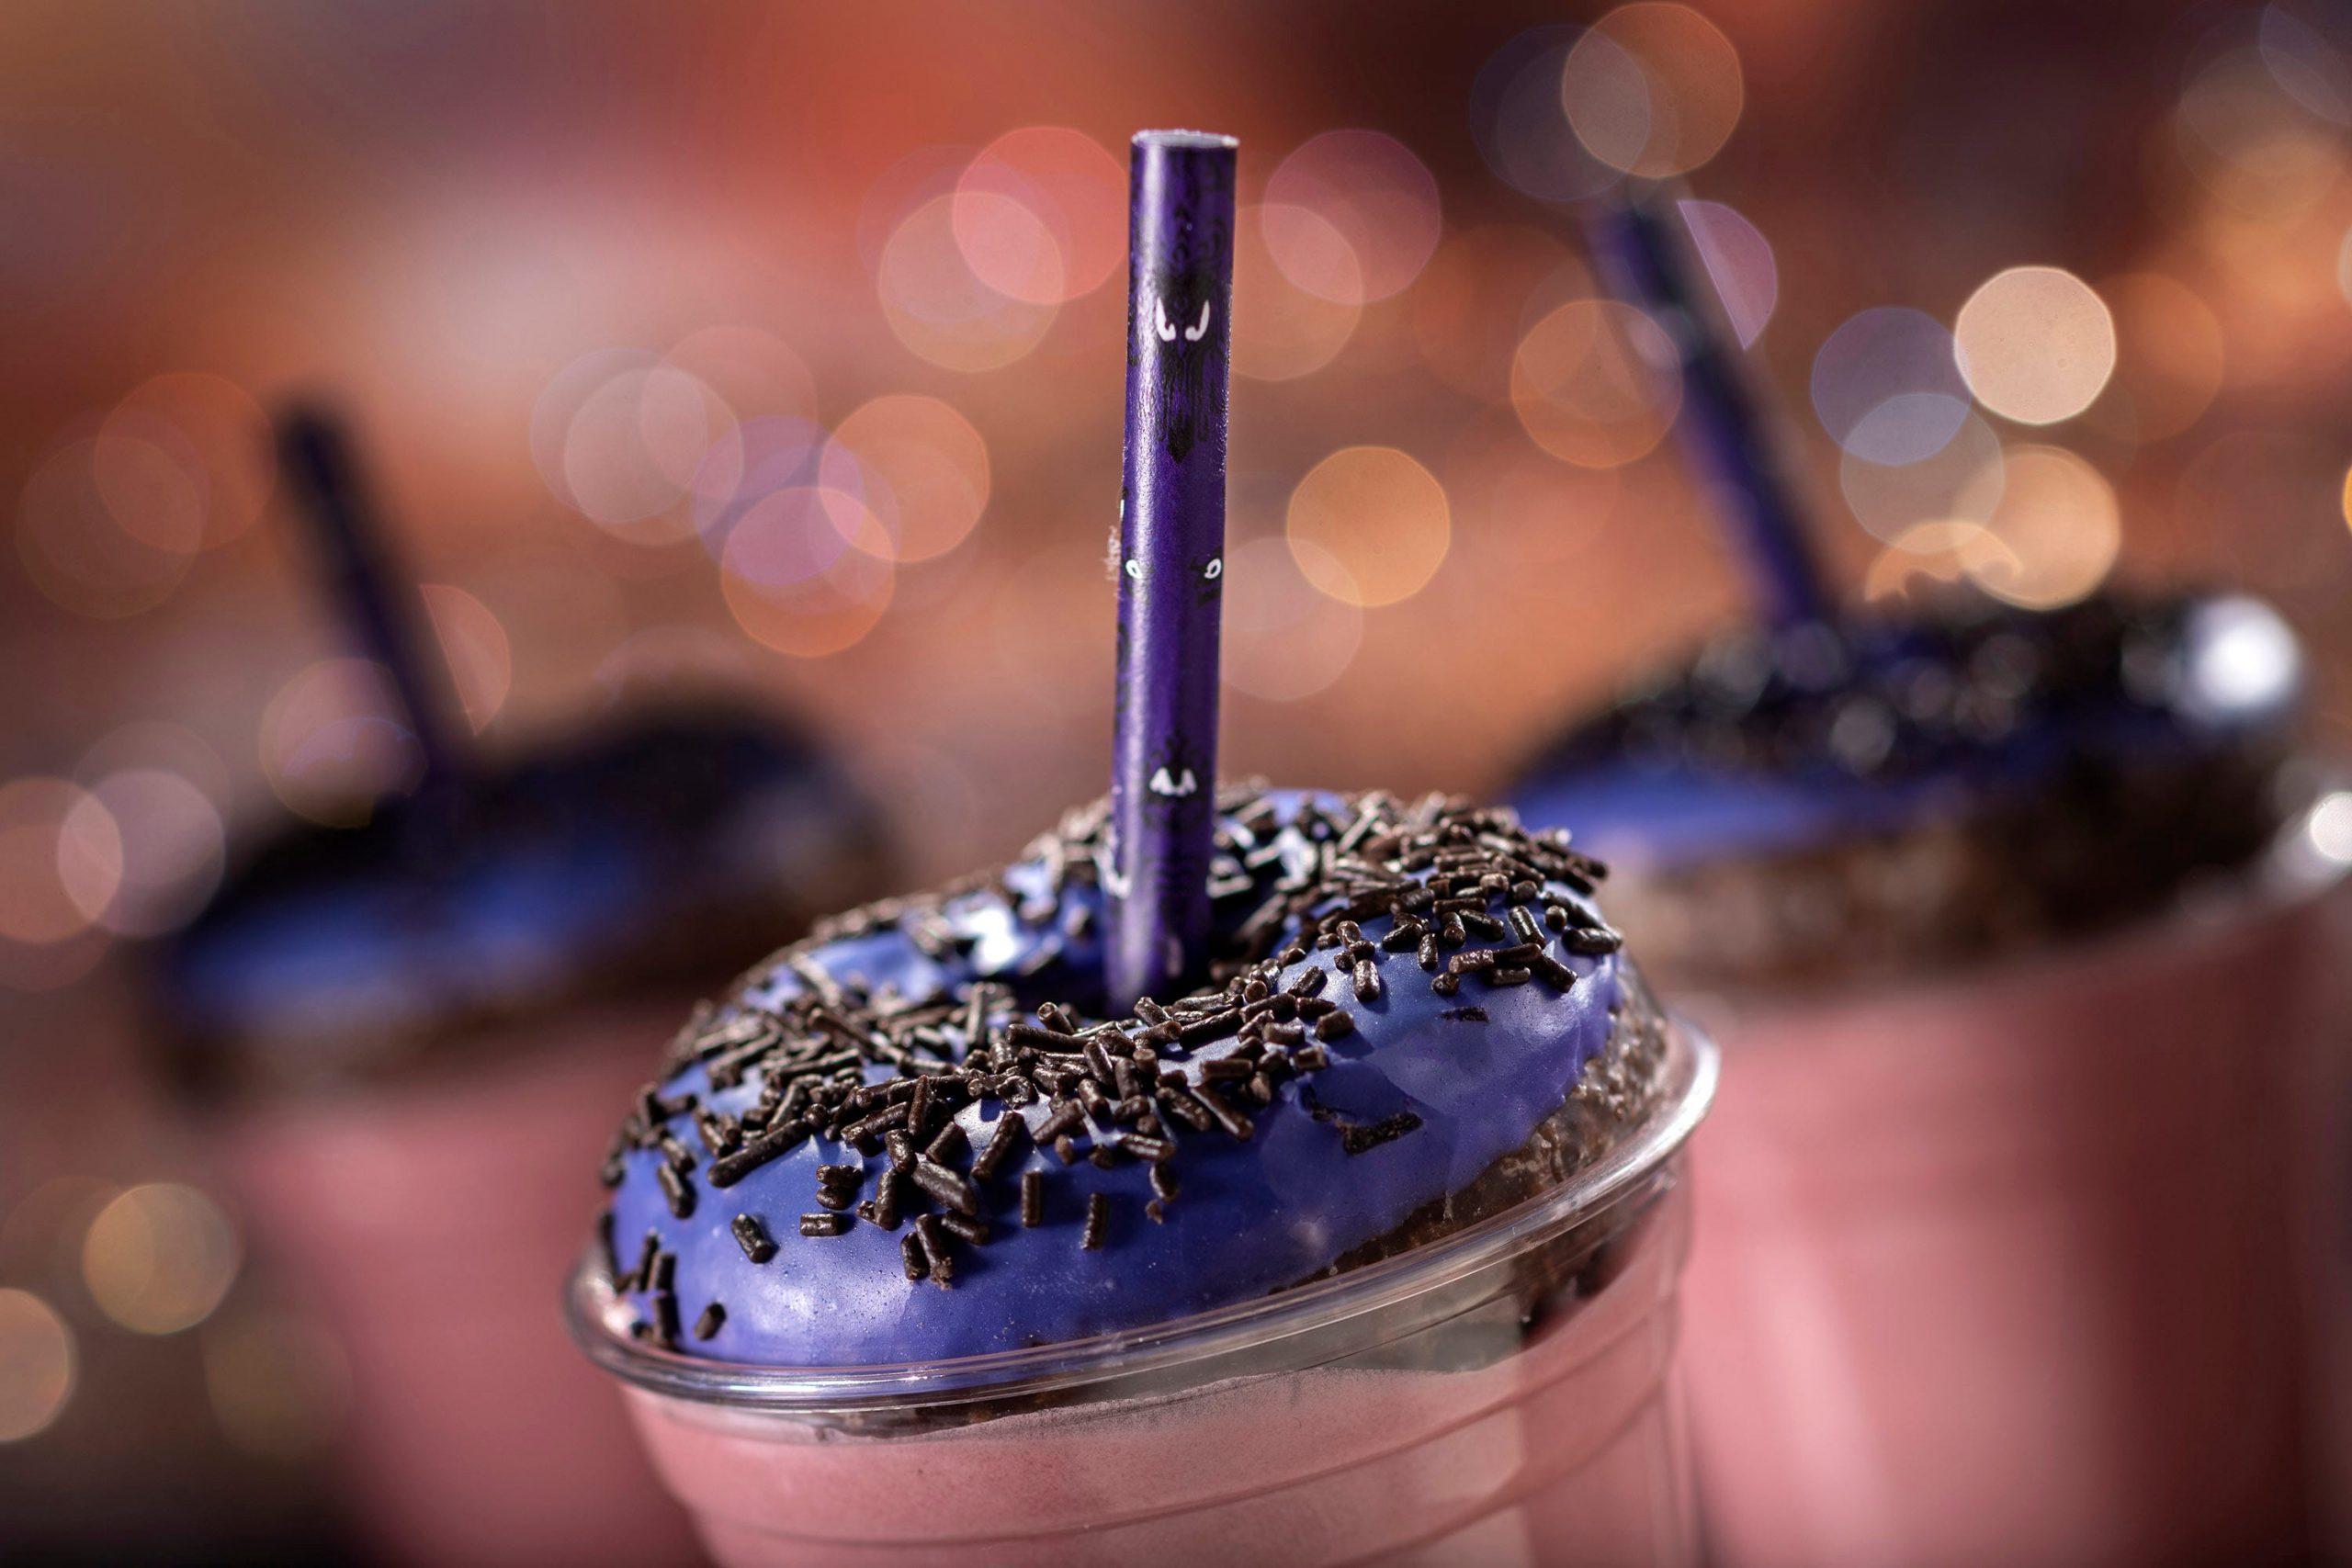 One of Disney's culinary creations, which is a purple shake with a purple sprinkled donut on top.